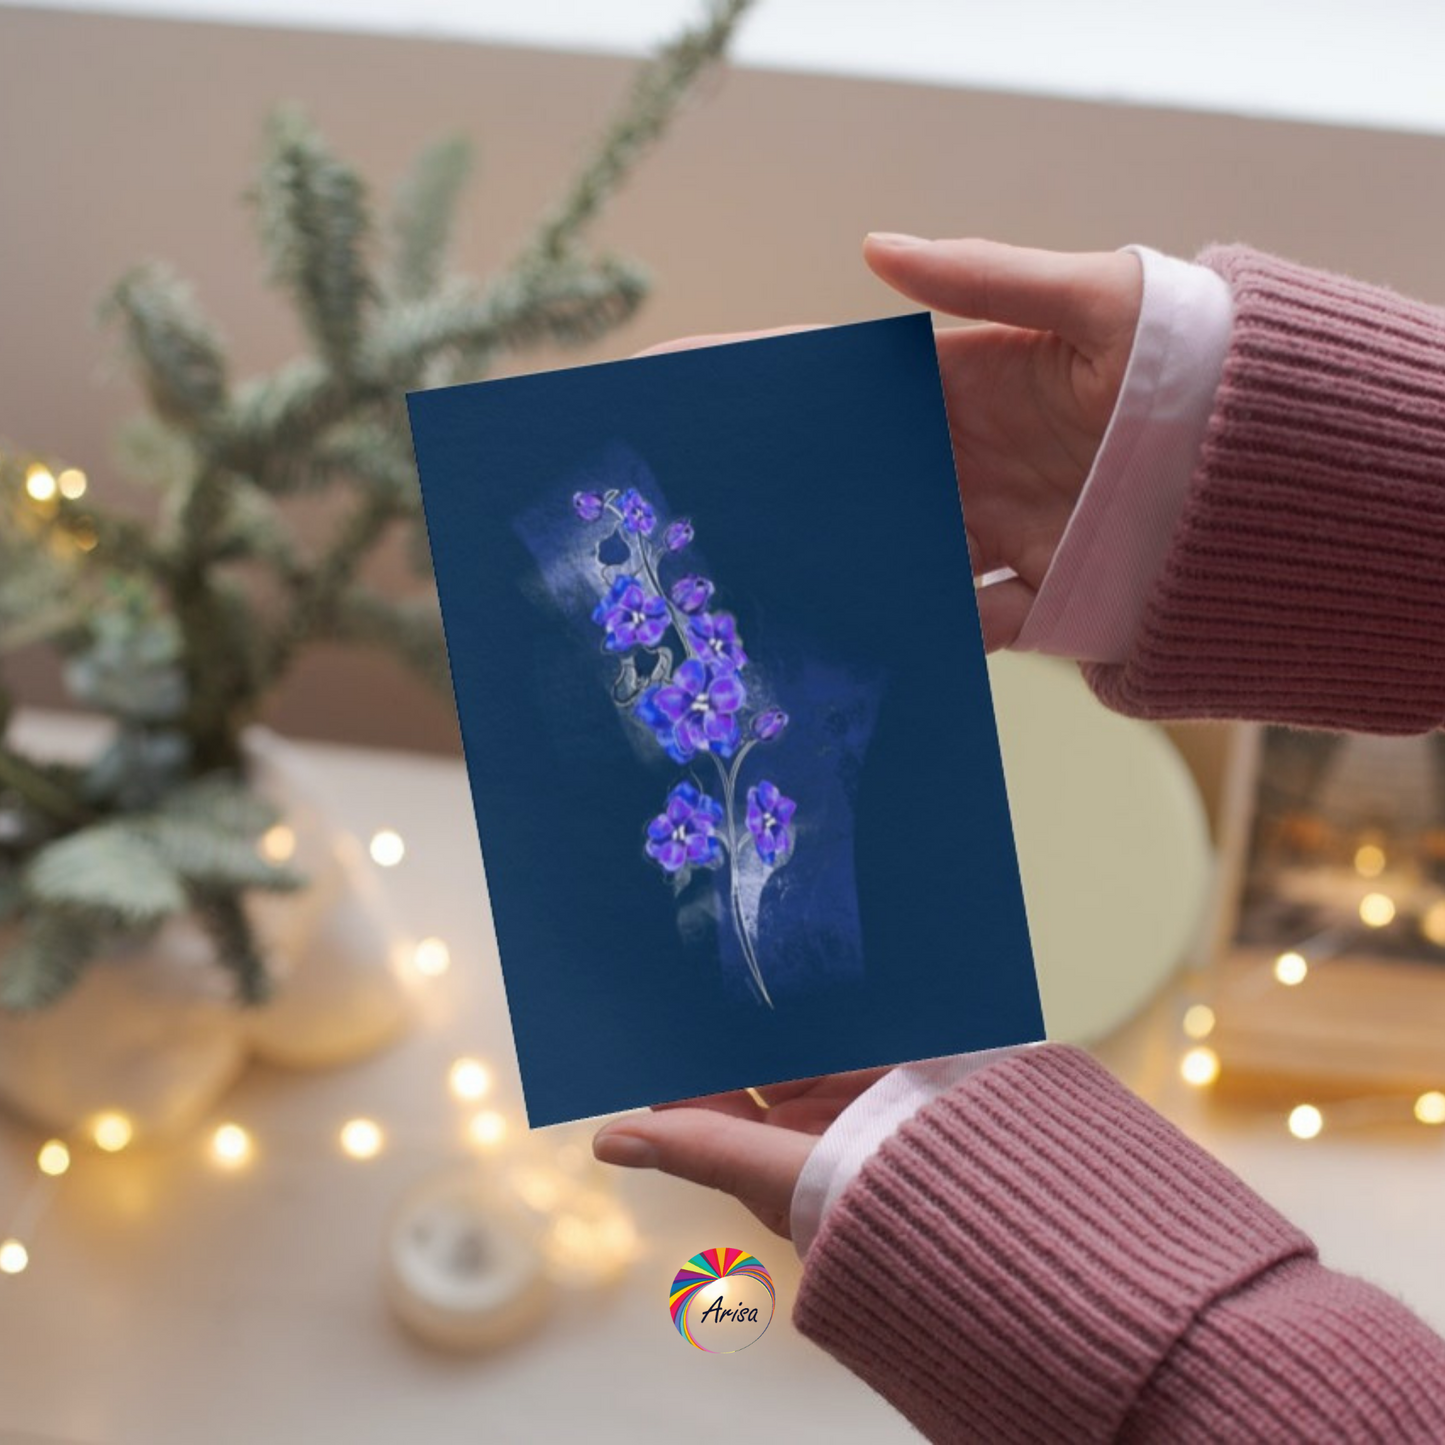 "LARKSPUR" Greeting Card by ArisaTeam in the hands of a woman ideal as a Christmas card.